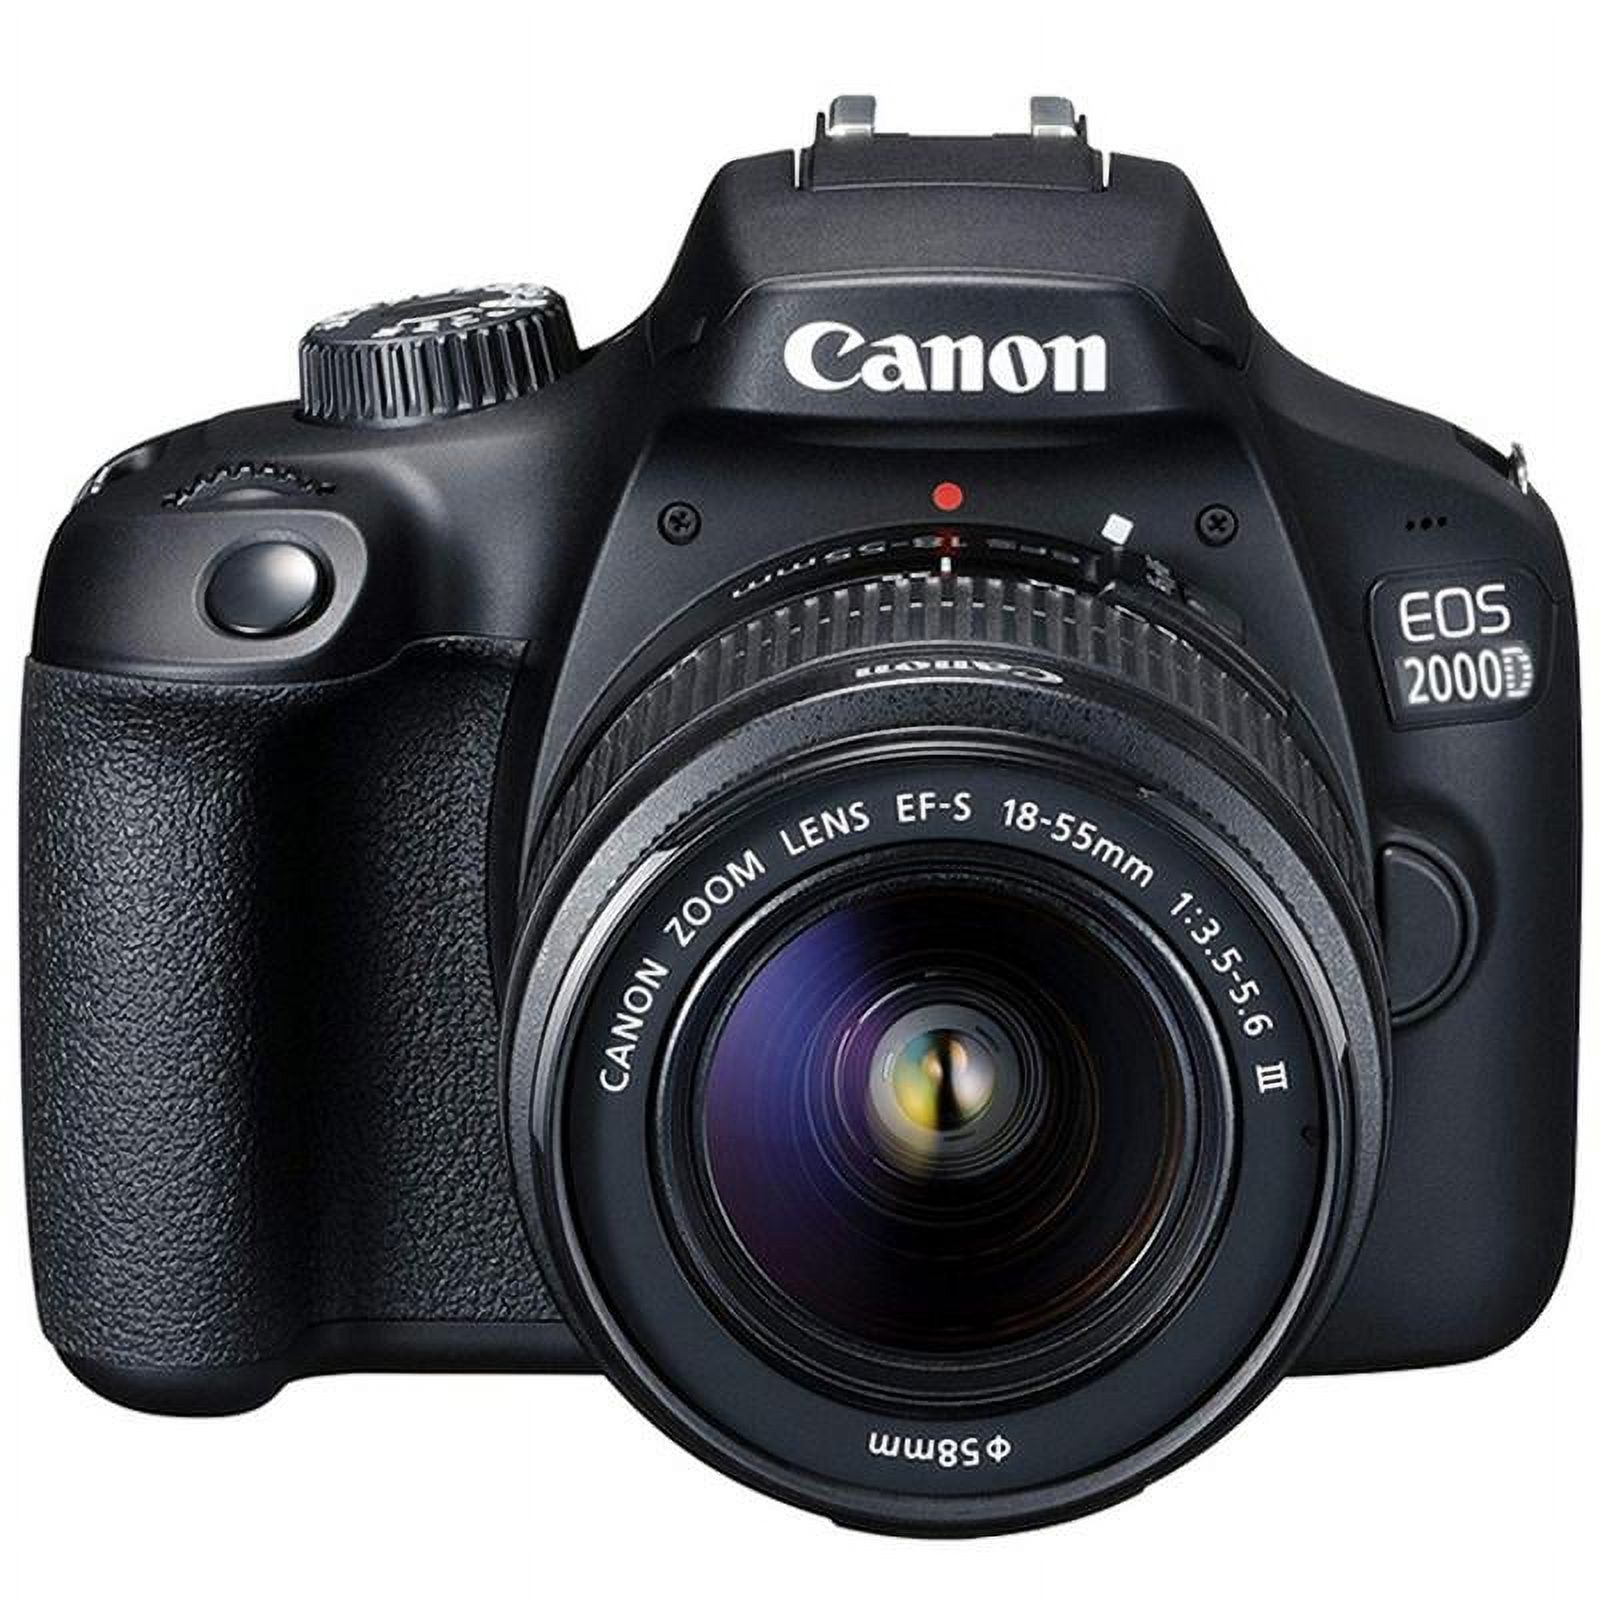 Canon EOS 2000D / Rebel T7 DSLR Camera w/ 18-55mm DC III Lens - image 1 of 2